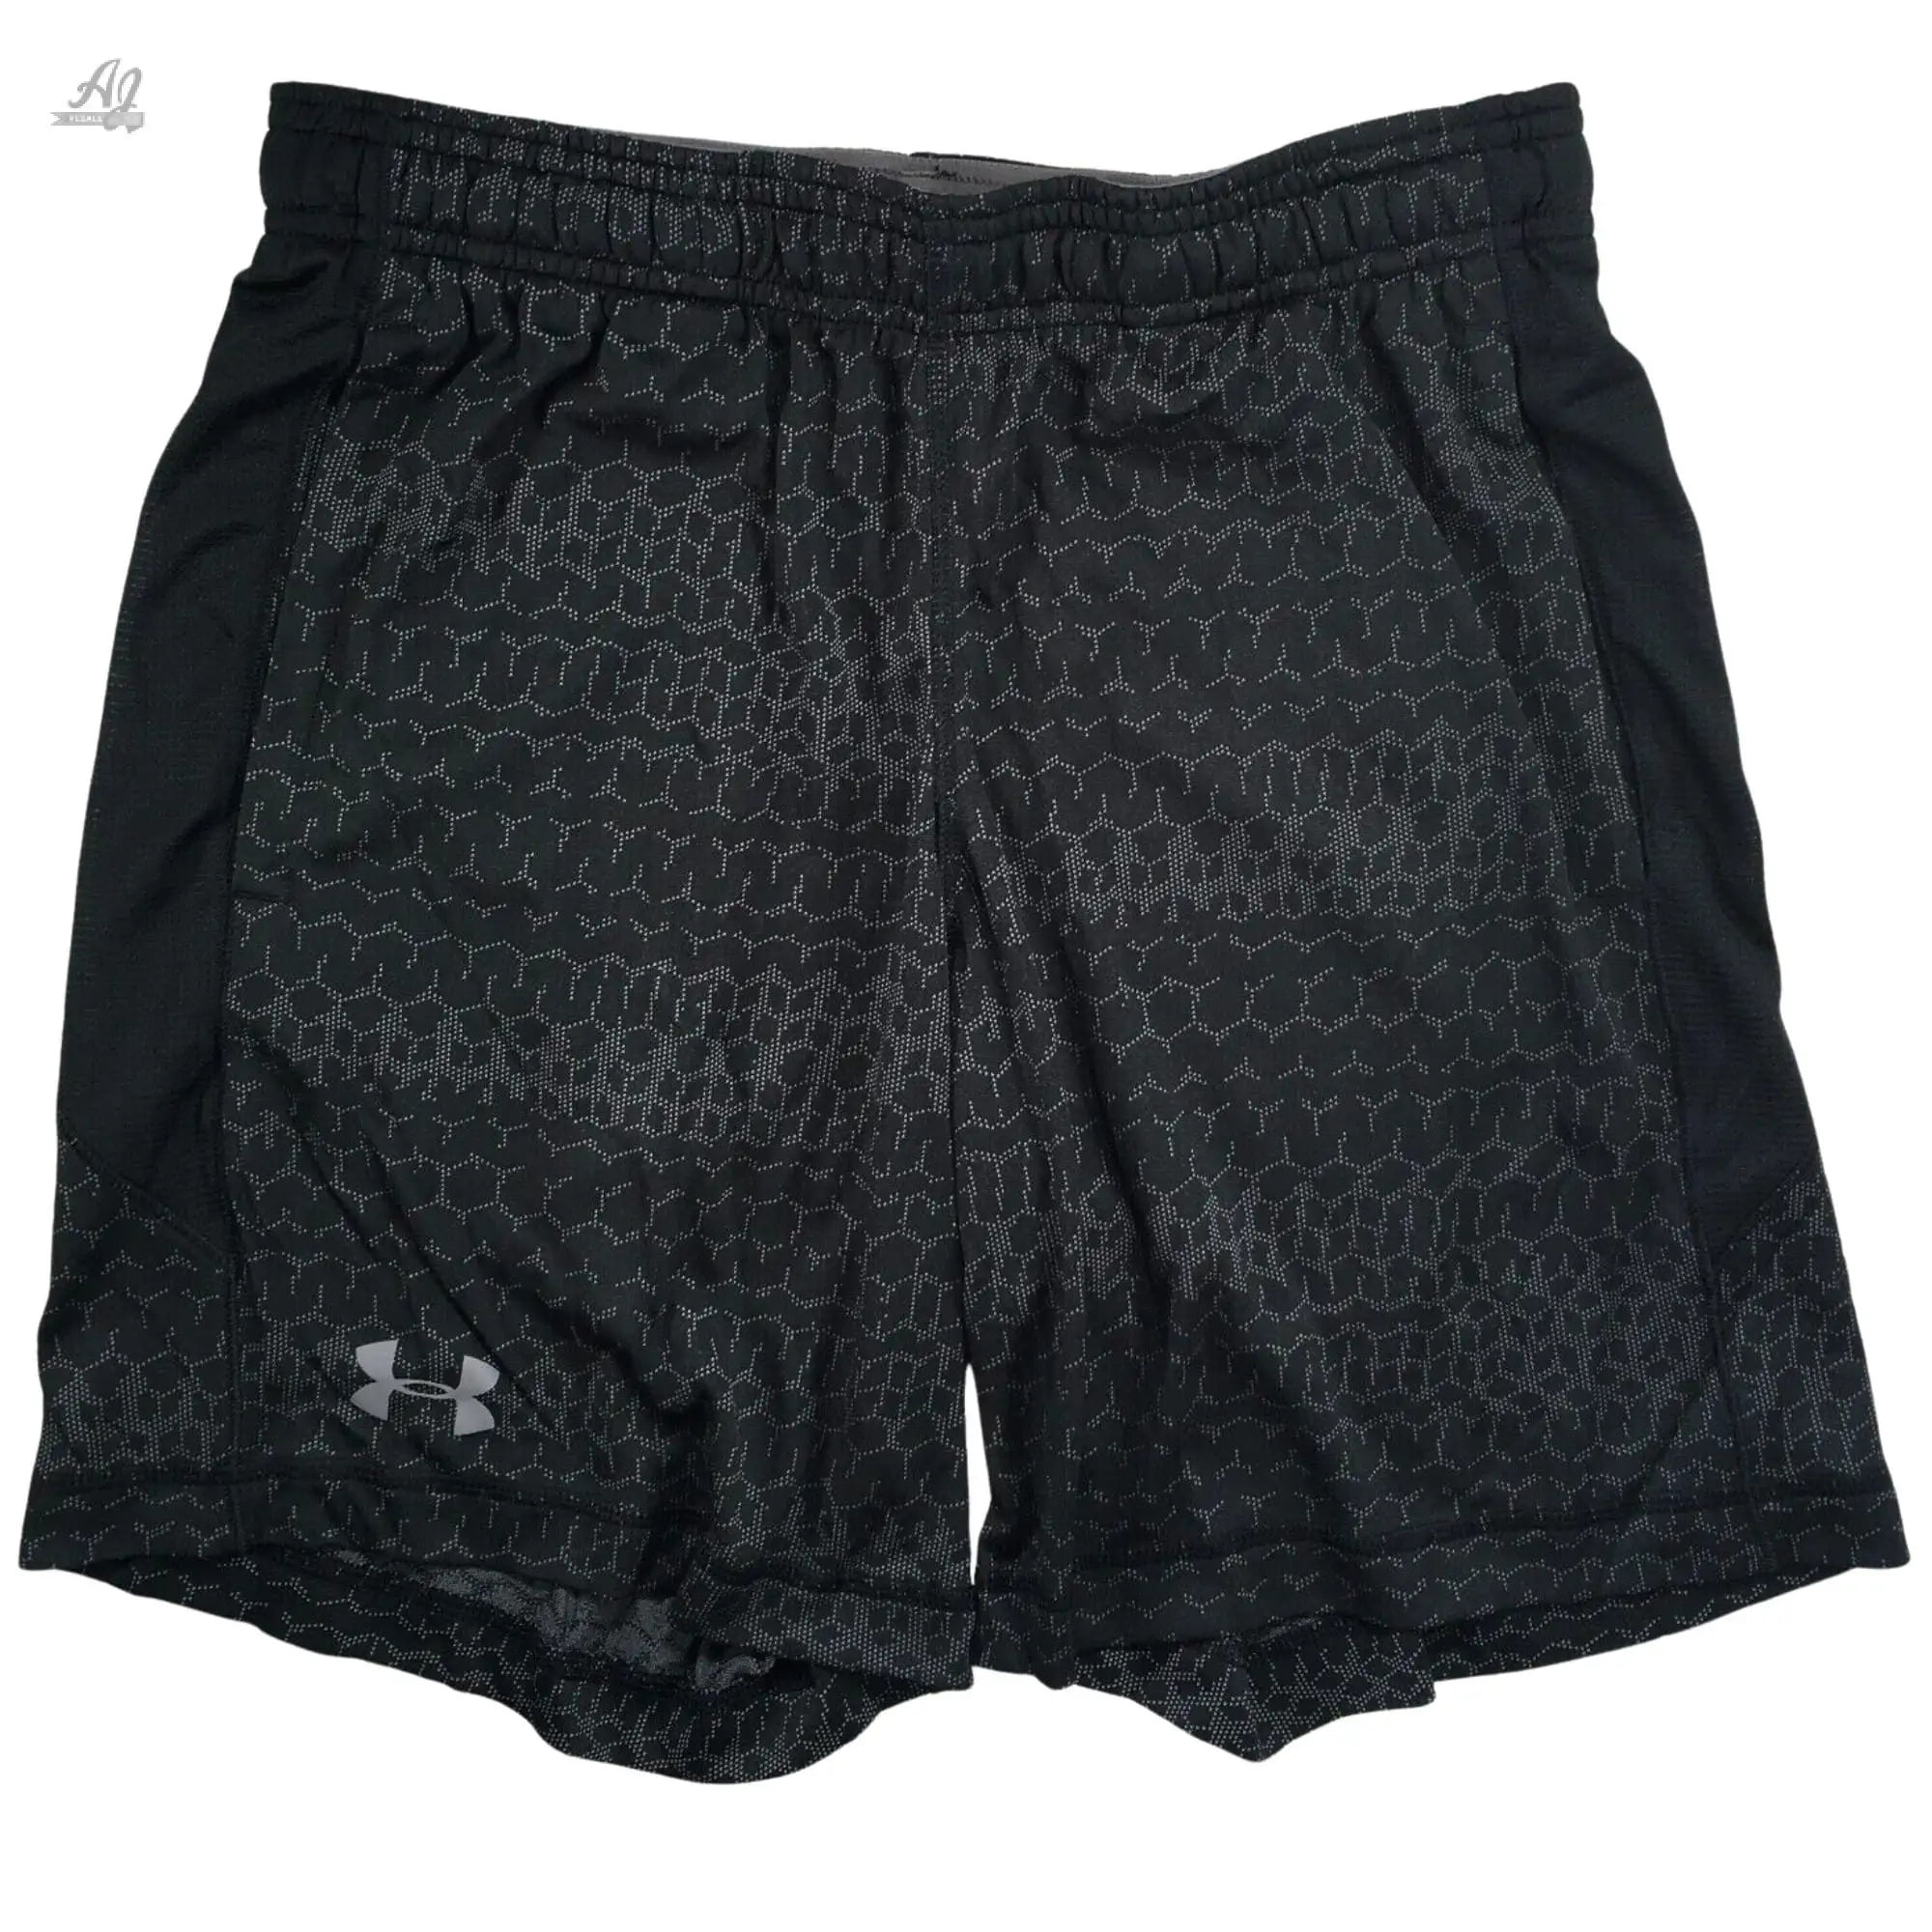 Under Armour Basketball Shorts HeatGear Gym Athletic Men's More Colors ...